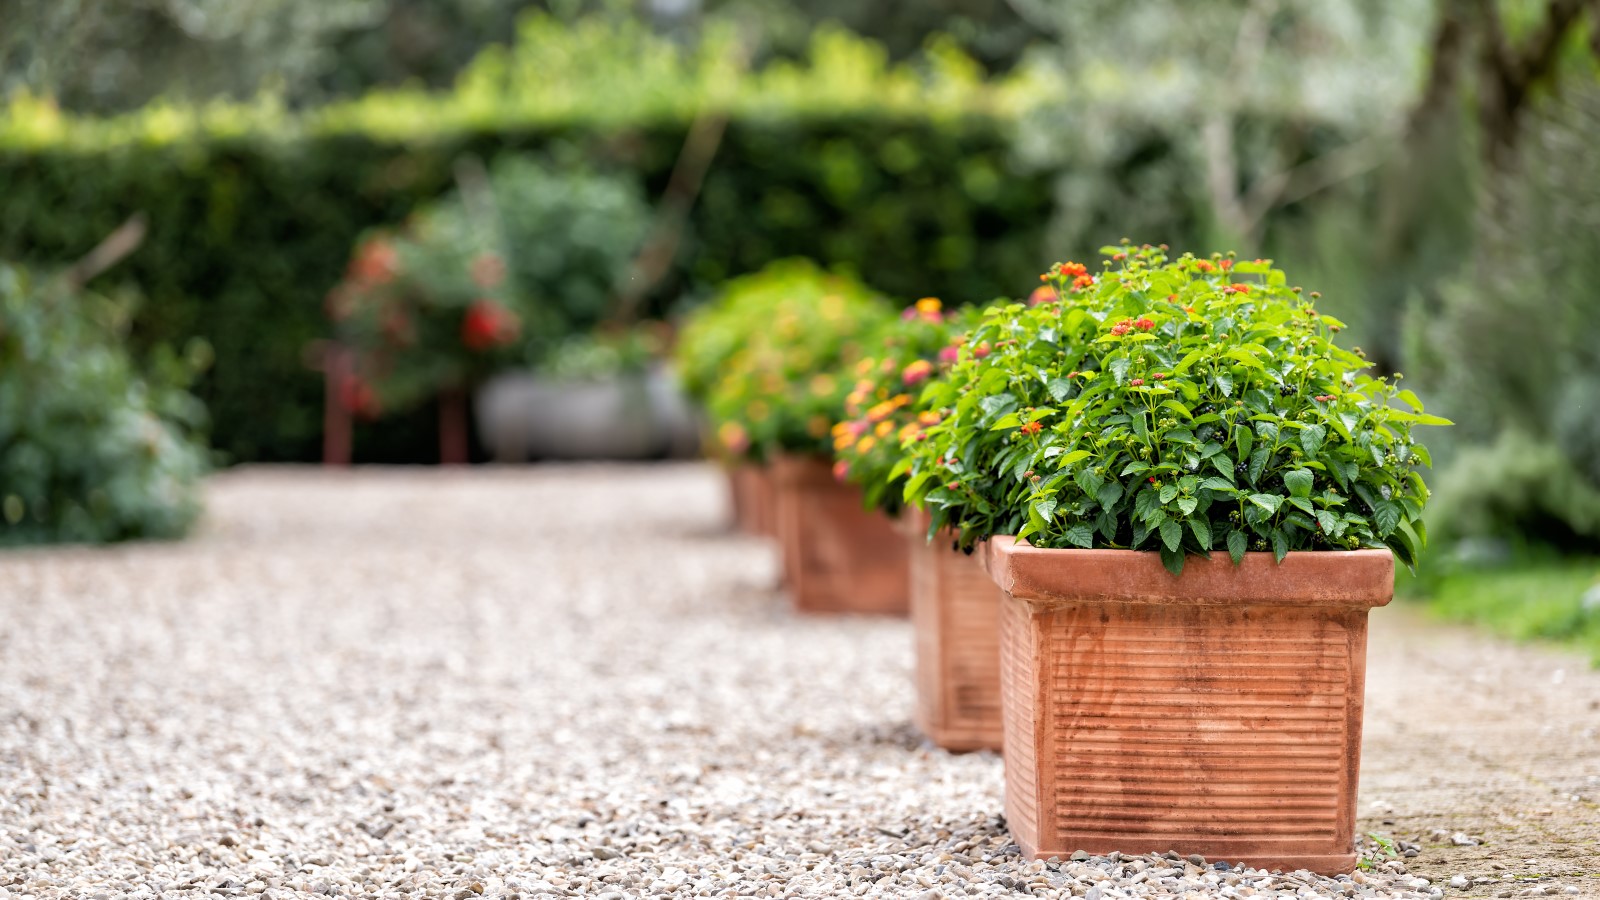 What Are The Best Fabric Pots For Your Plants?